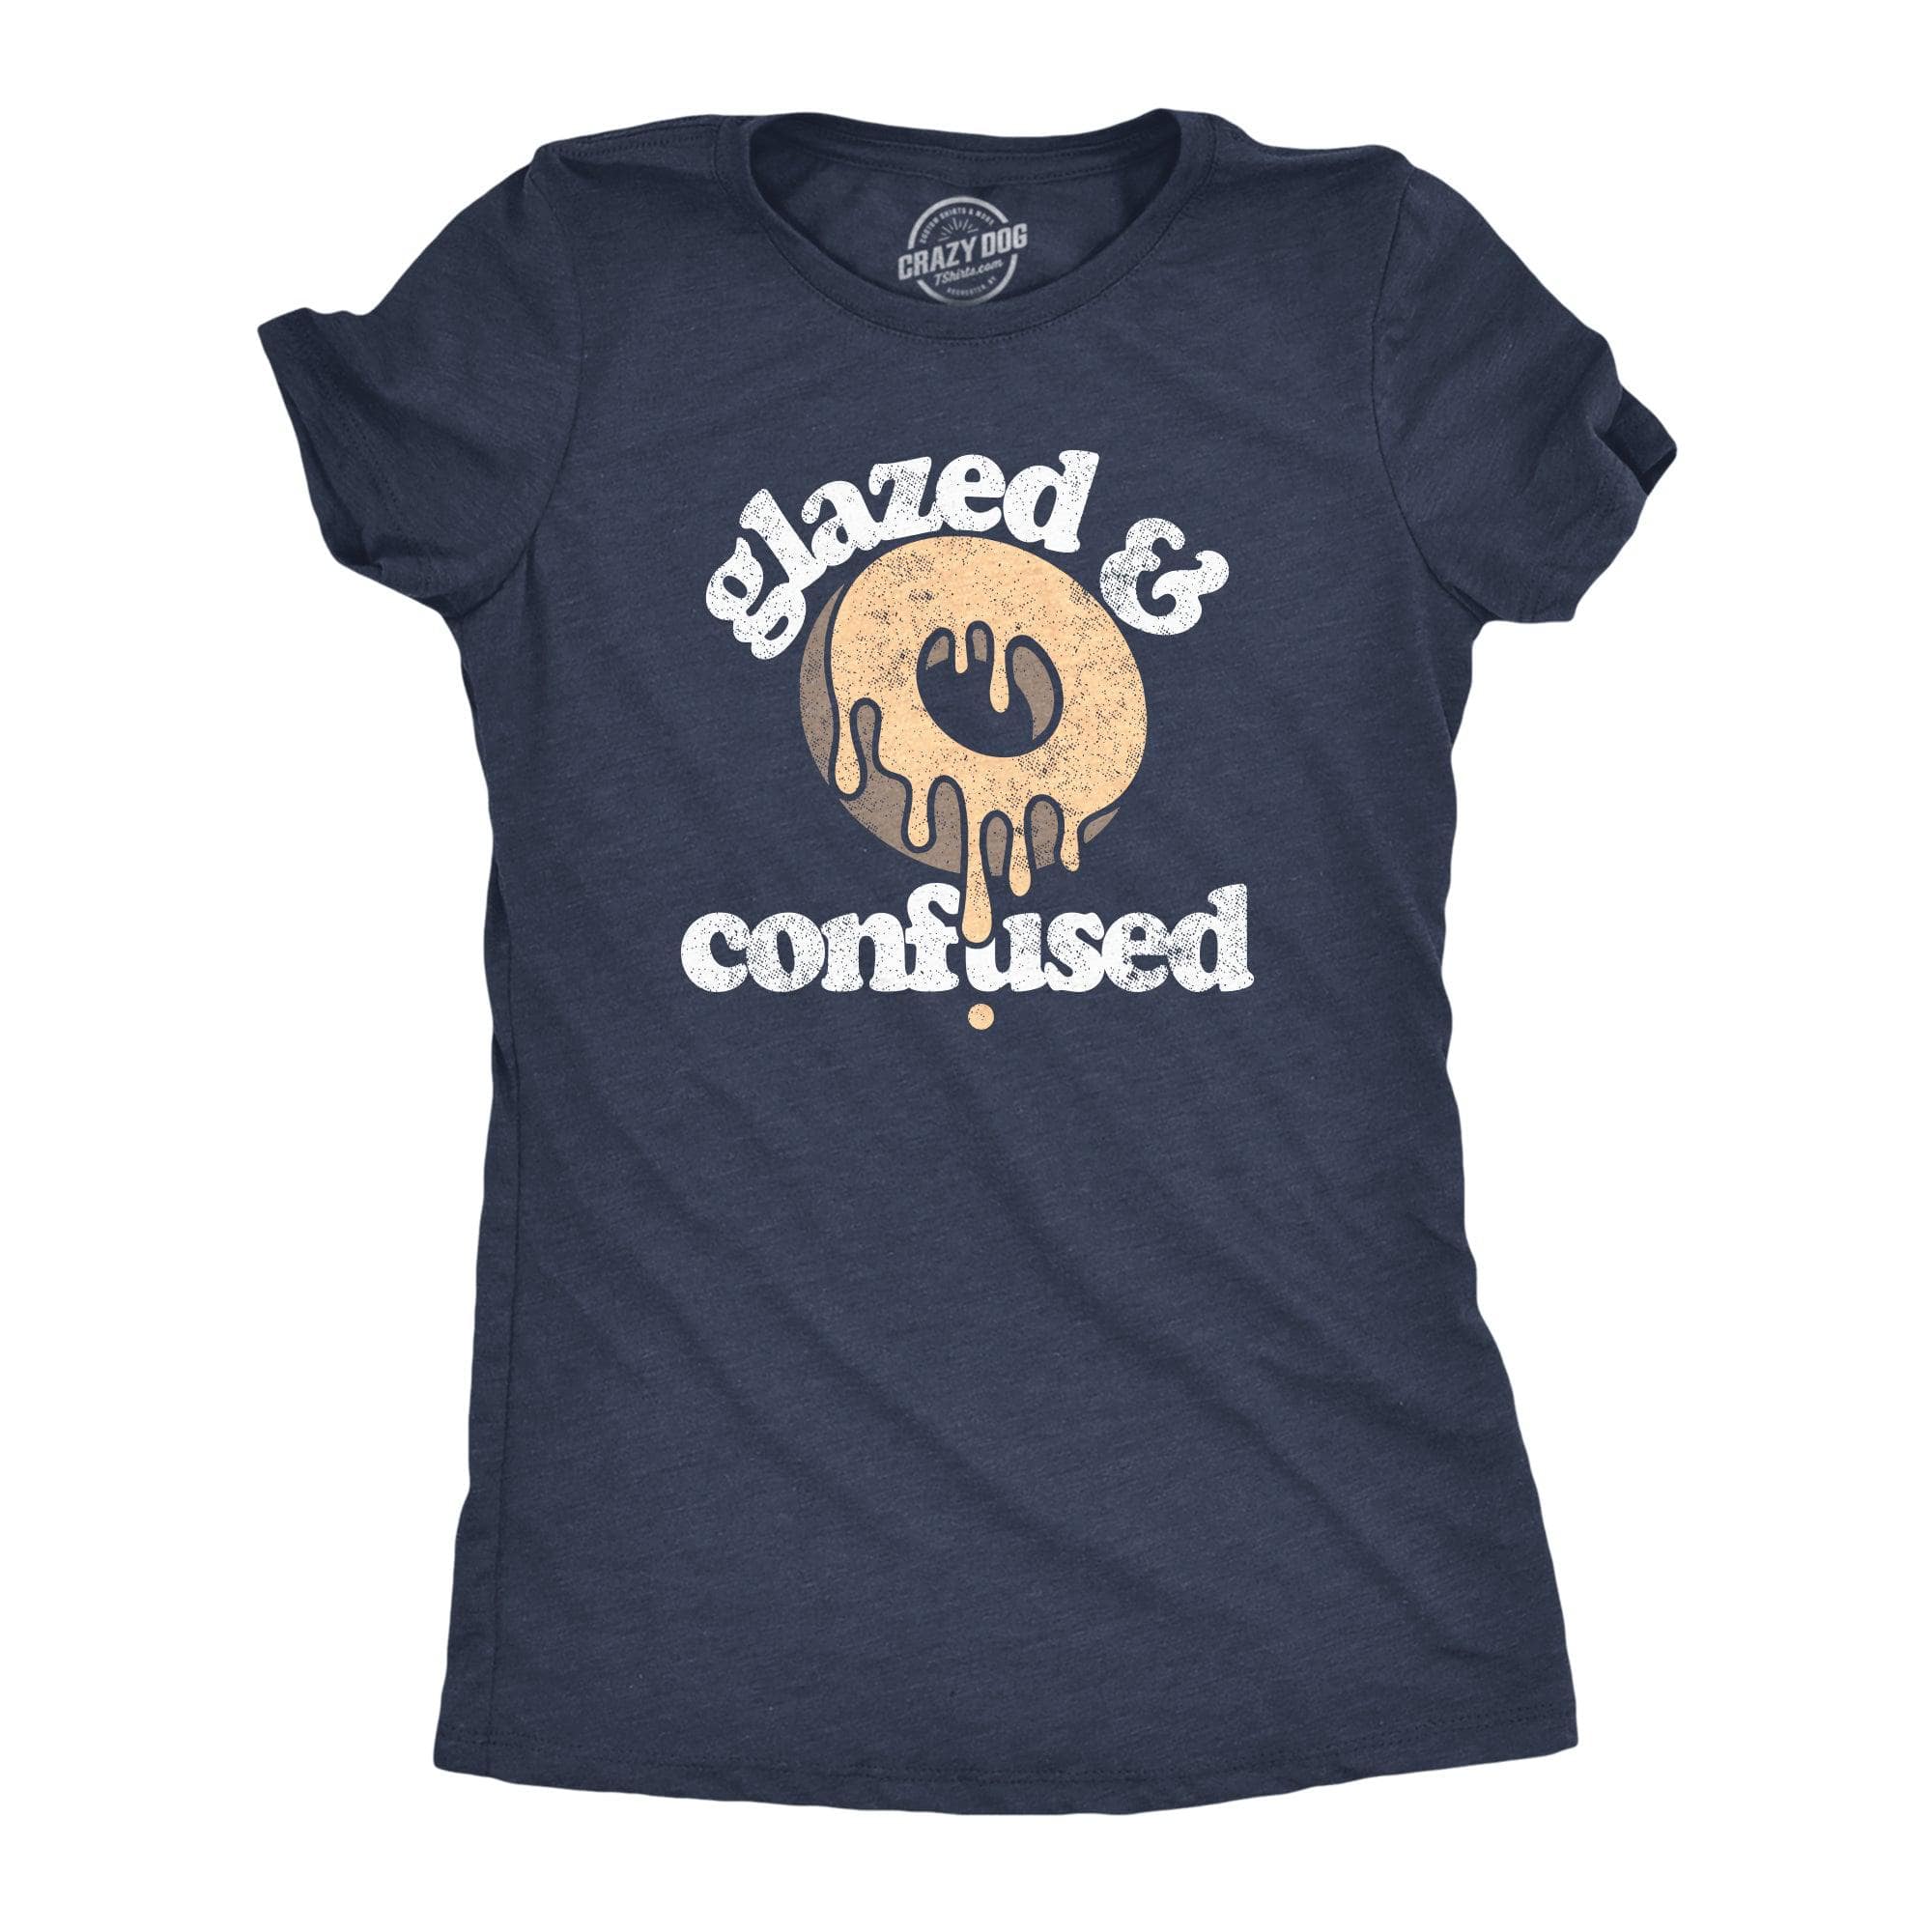 Glazed And Confused Women's Tshirt  -  Crazy Dog T-Shirts